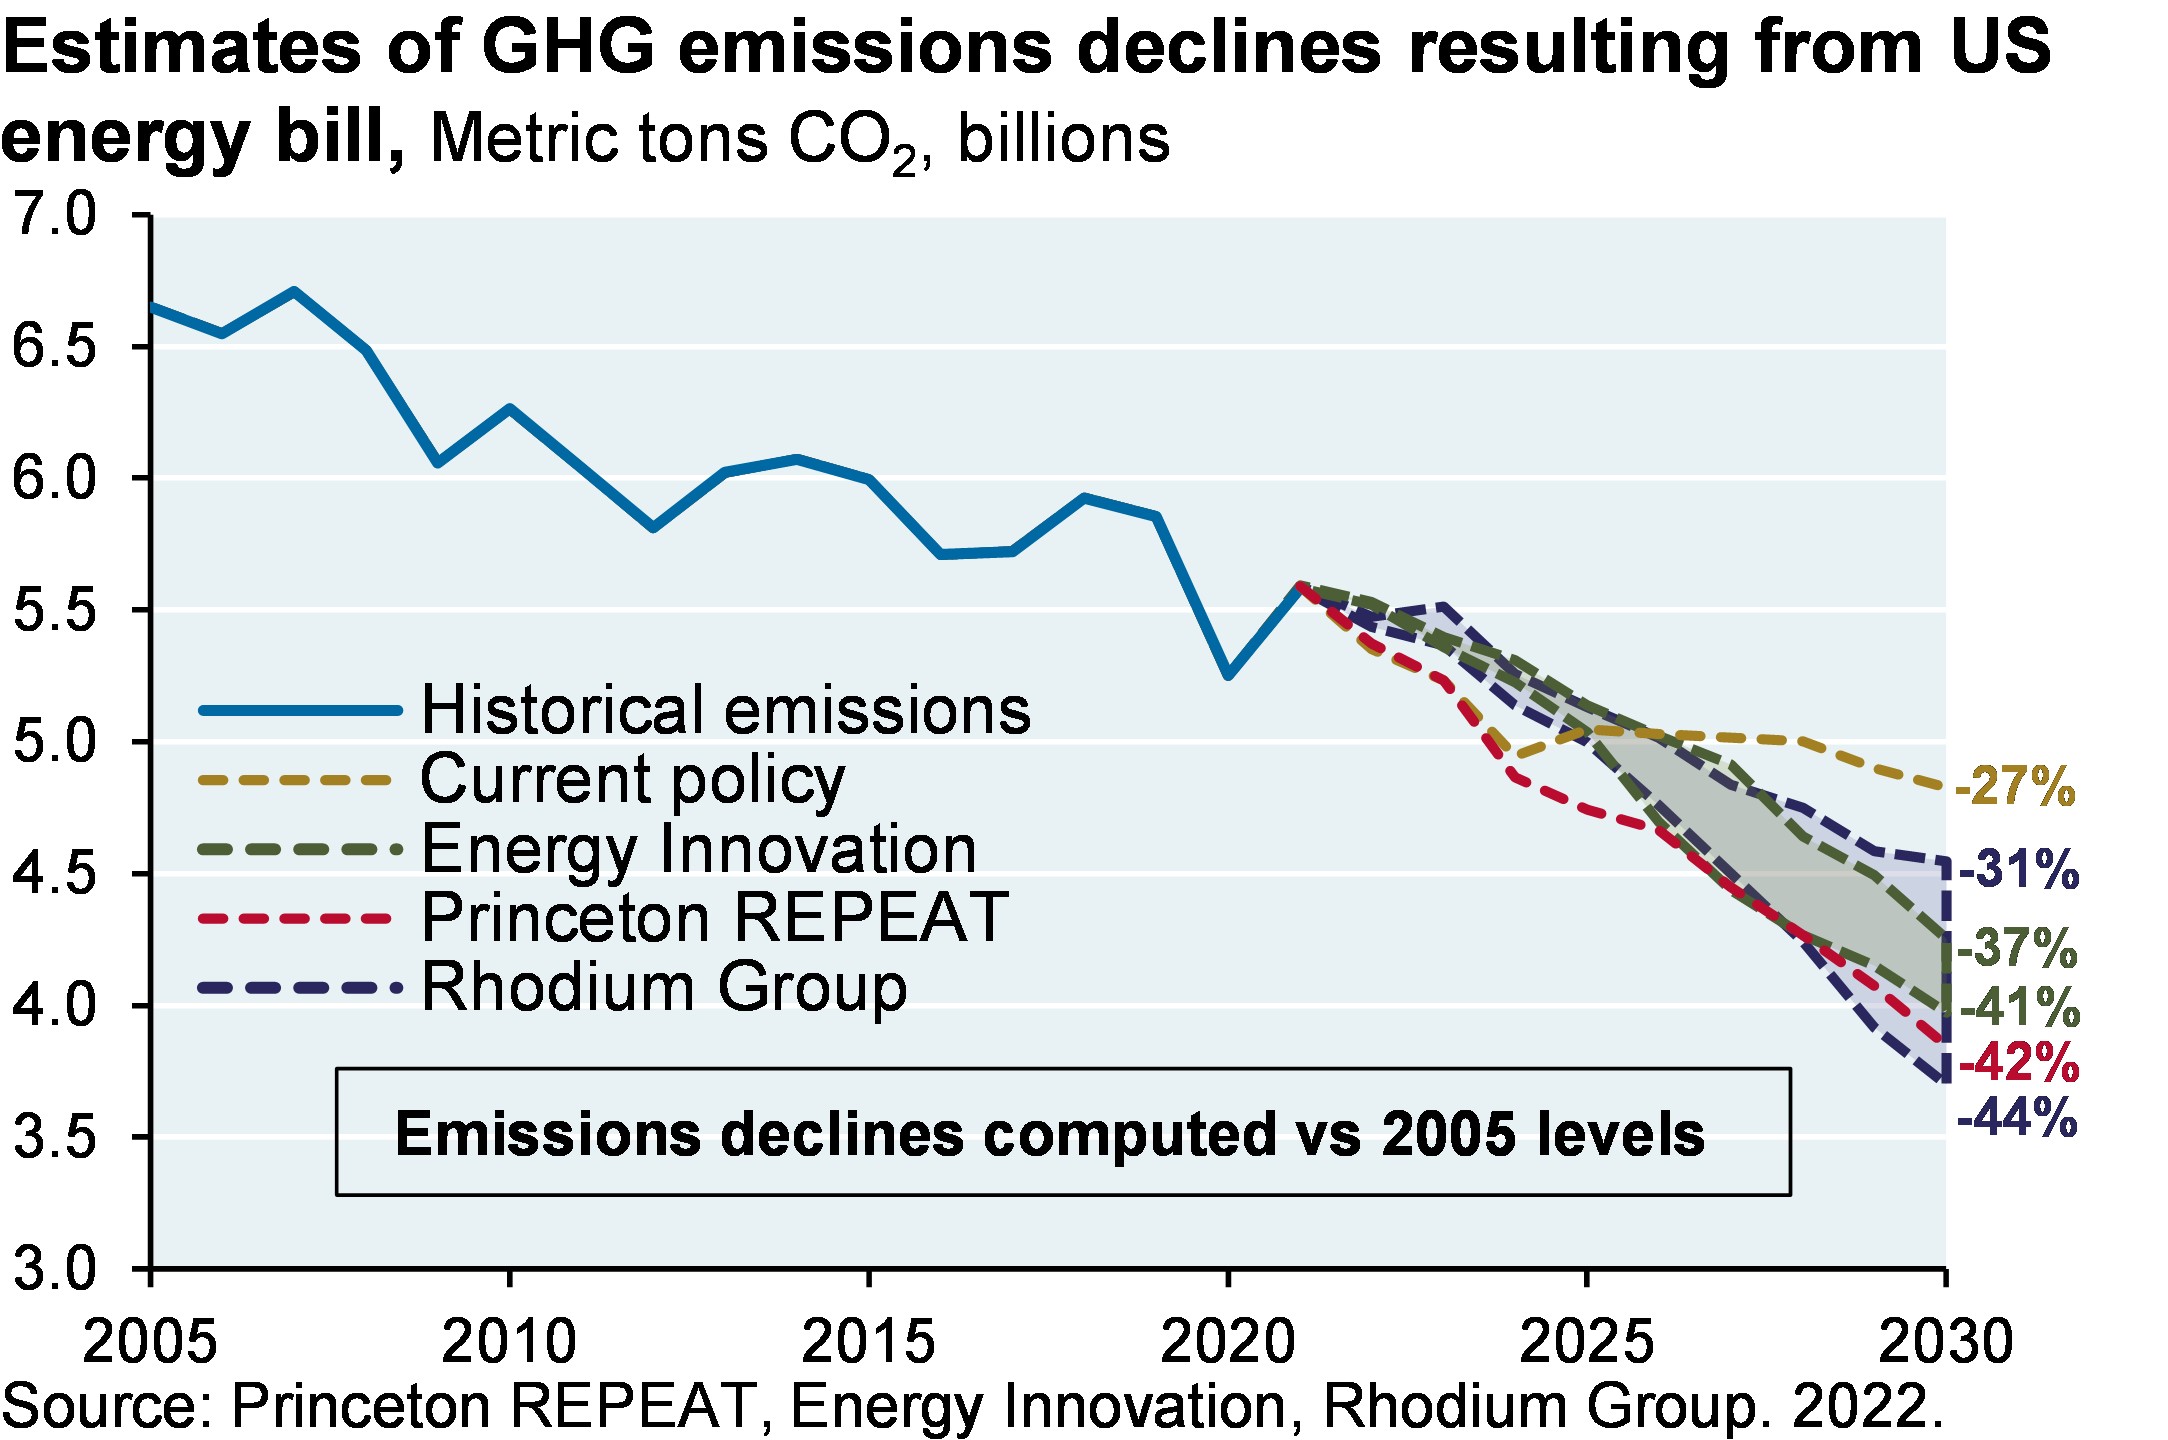 Estimates of GHG emissions declines  resulting from US energy bill